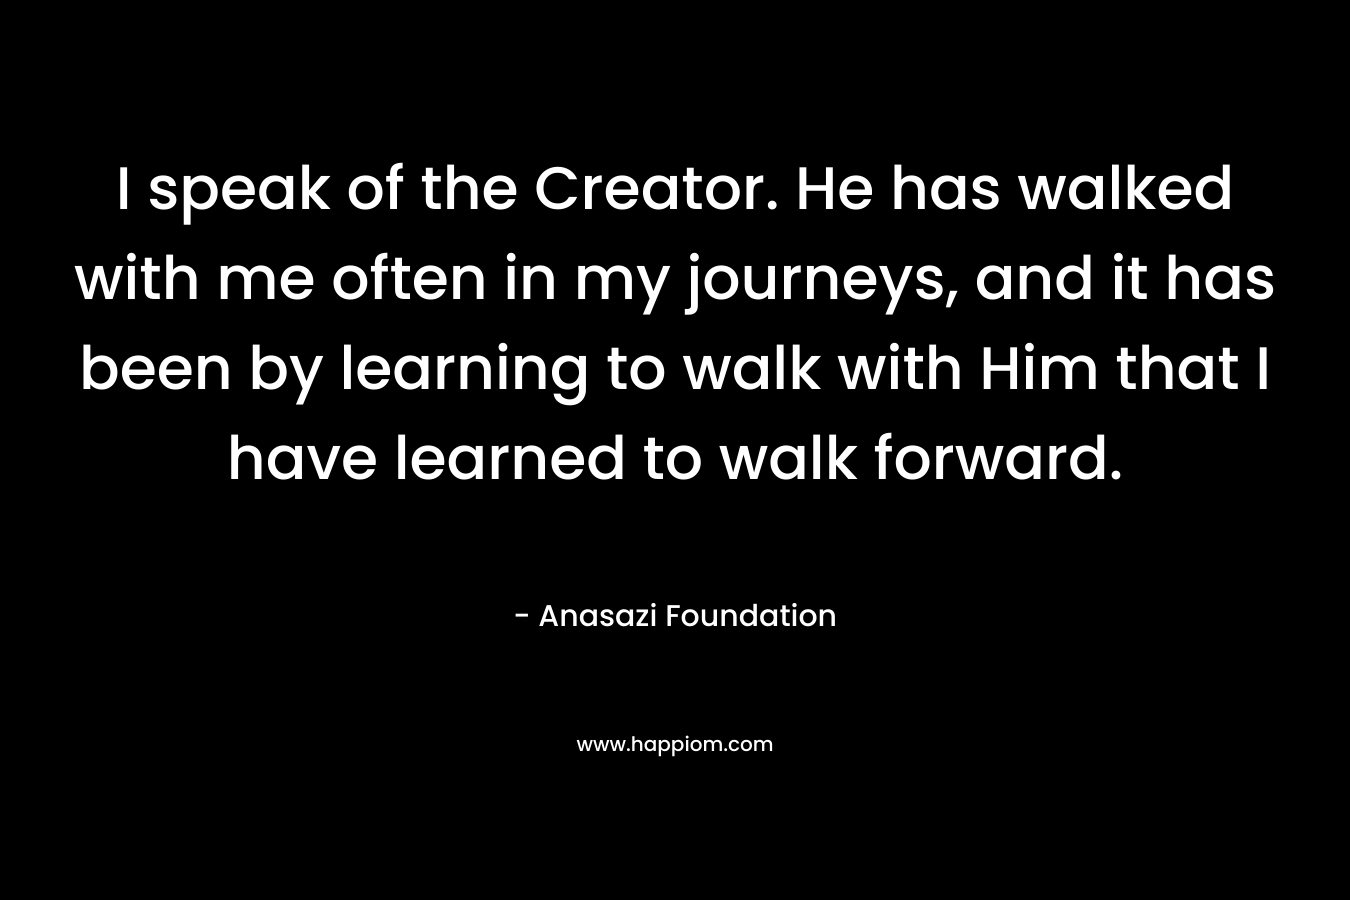 I speak of the Creator. He has walked with me often in my journeys, and it has been by learning to walk with Him that I have learned to walk forward. – Anasazi Foundation